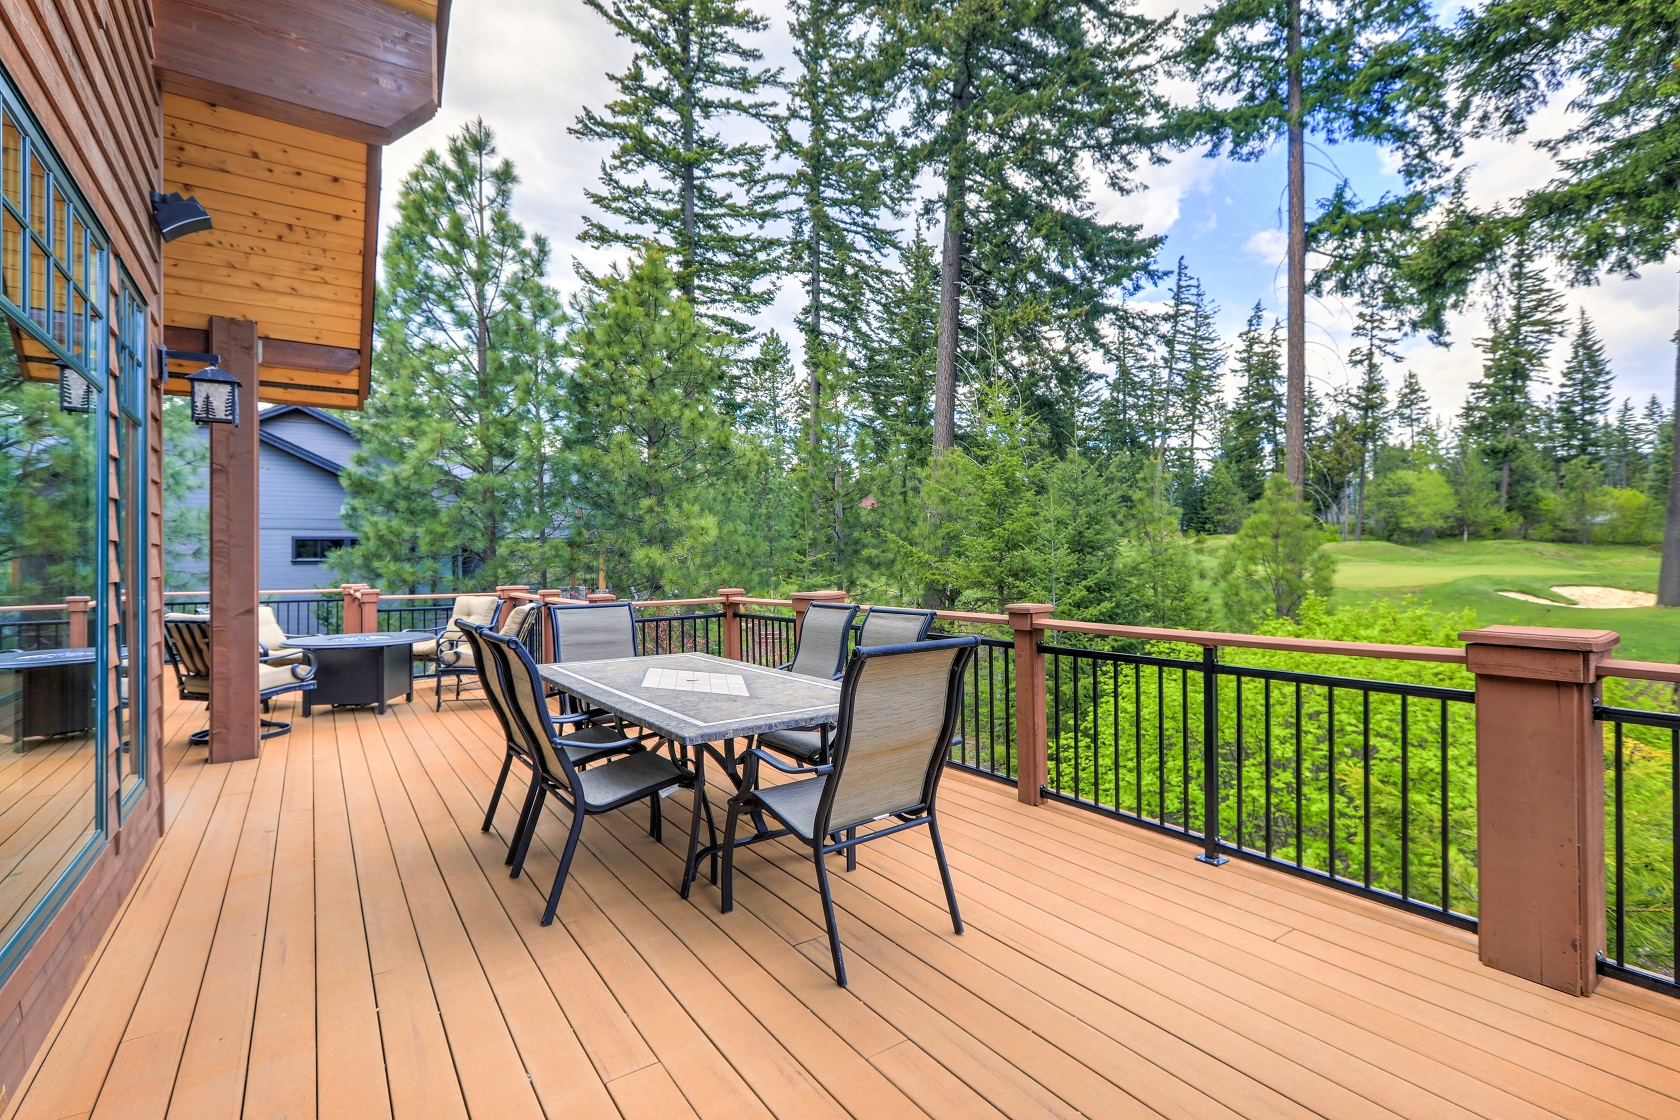 Add a Deck to Your Home for a Great New Family Space